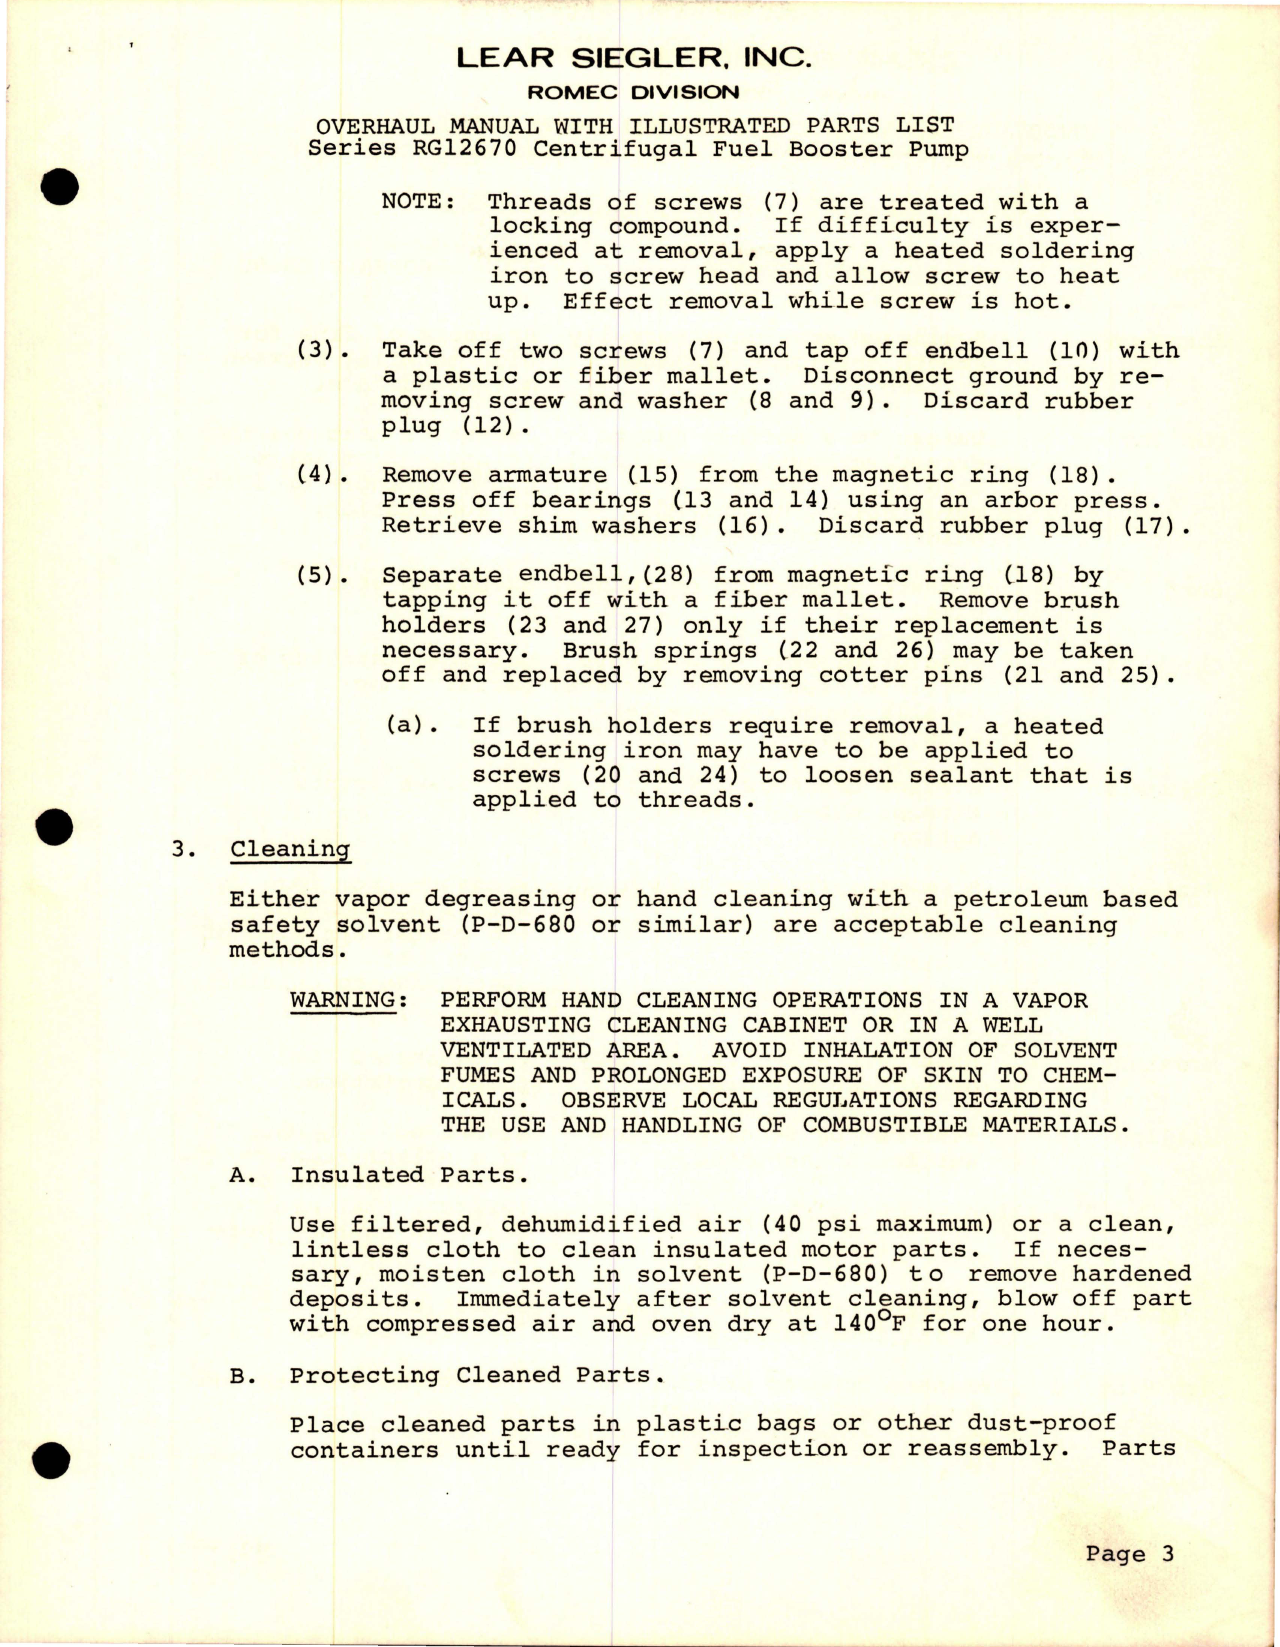 Sample page 5 from AirCorps Library document: Overhaul Manual with Parts List for Centrifugal Fuel Booster Pump - Series RG12670 